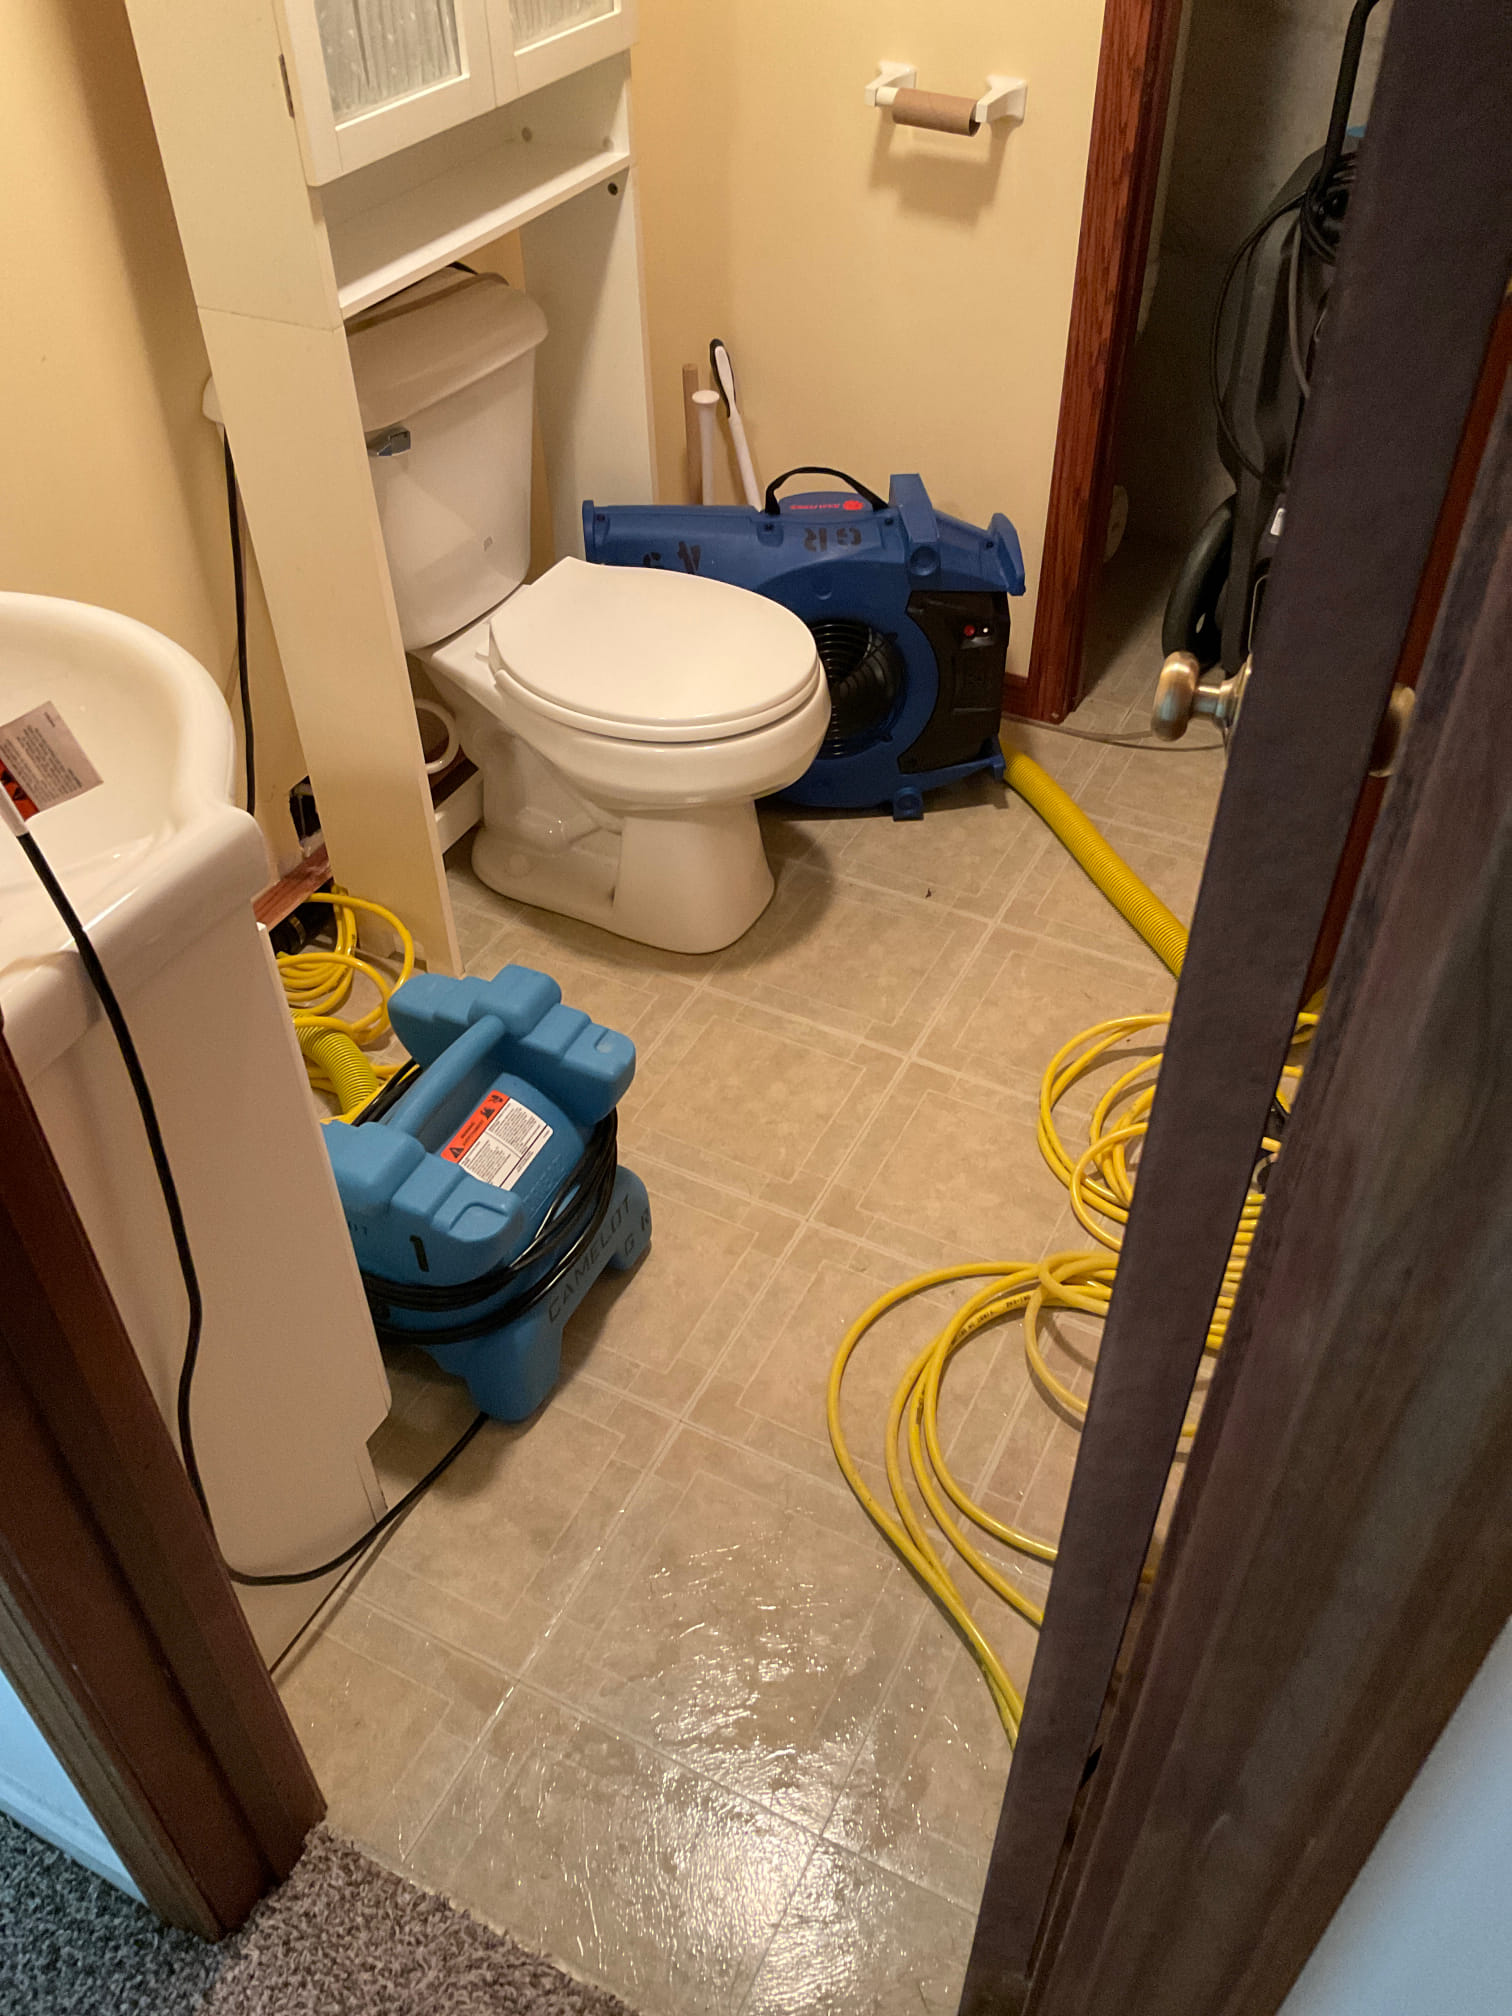 Drying of bathroom after toilet overflow